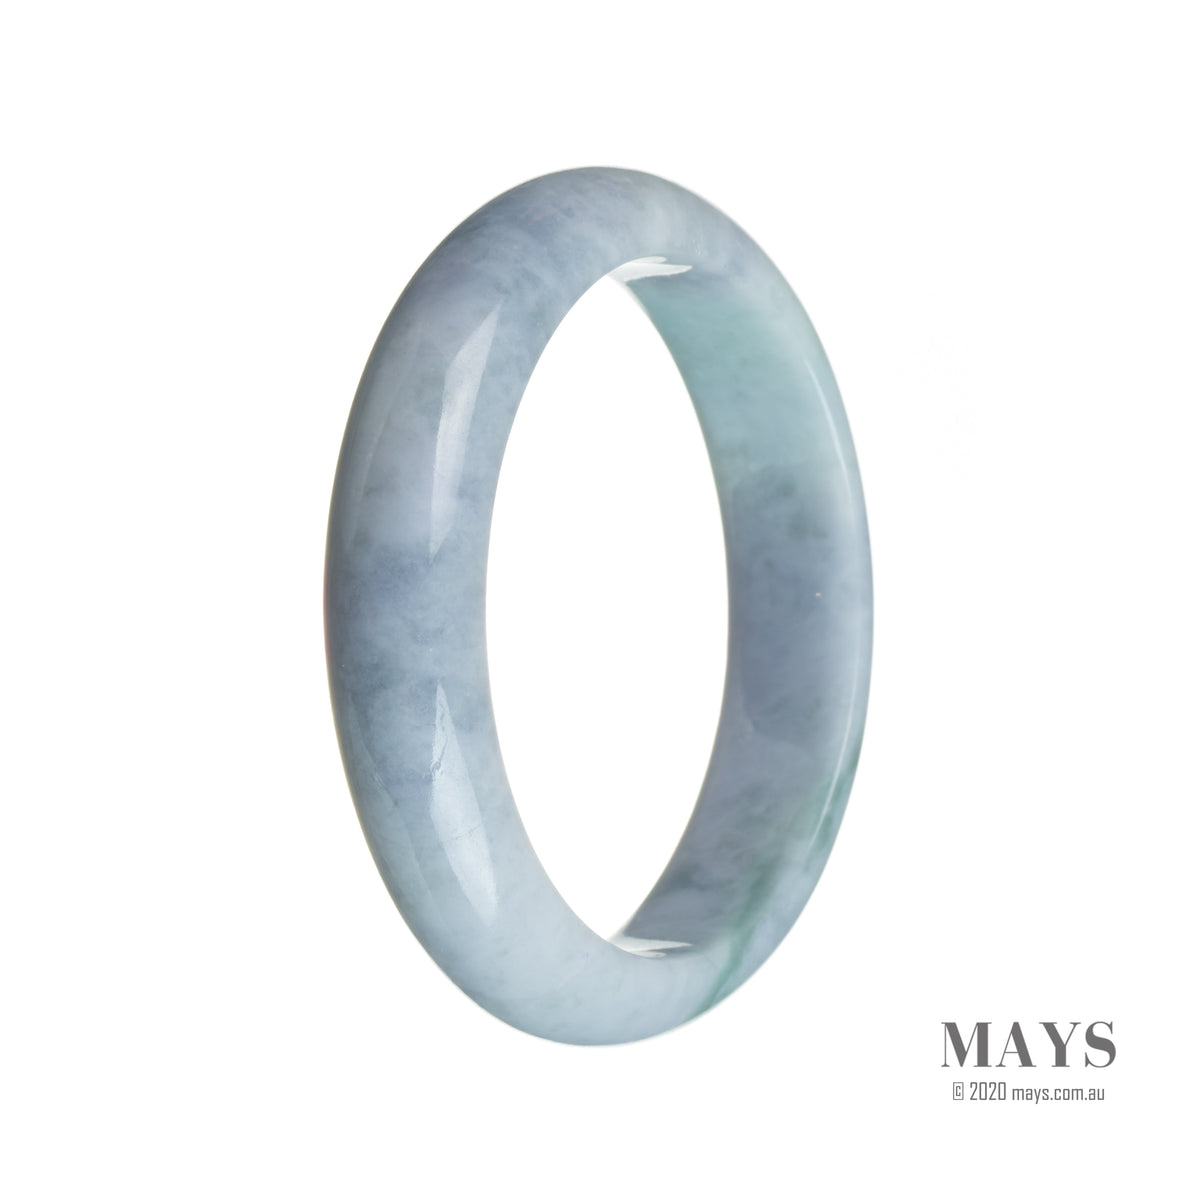 A close-up photo of a half-moon shaped bluish lavender jade bangle, measuring 58mm in diameter. The bangle is made of real Type A jade and features a smooth, polished surface.